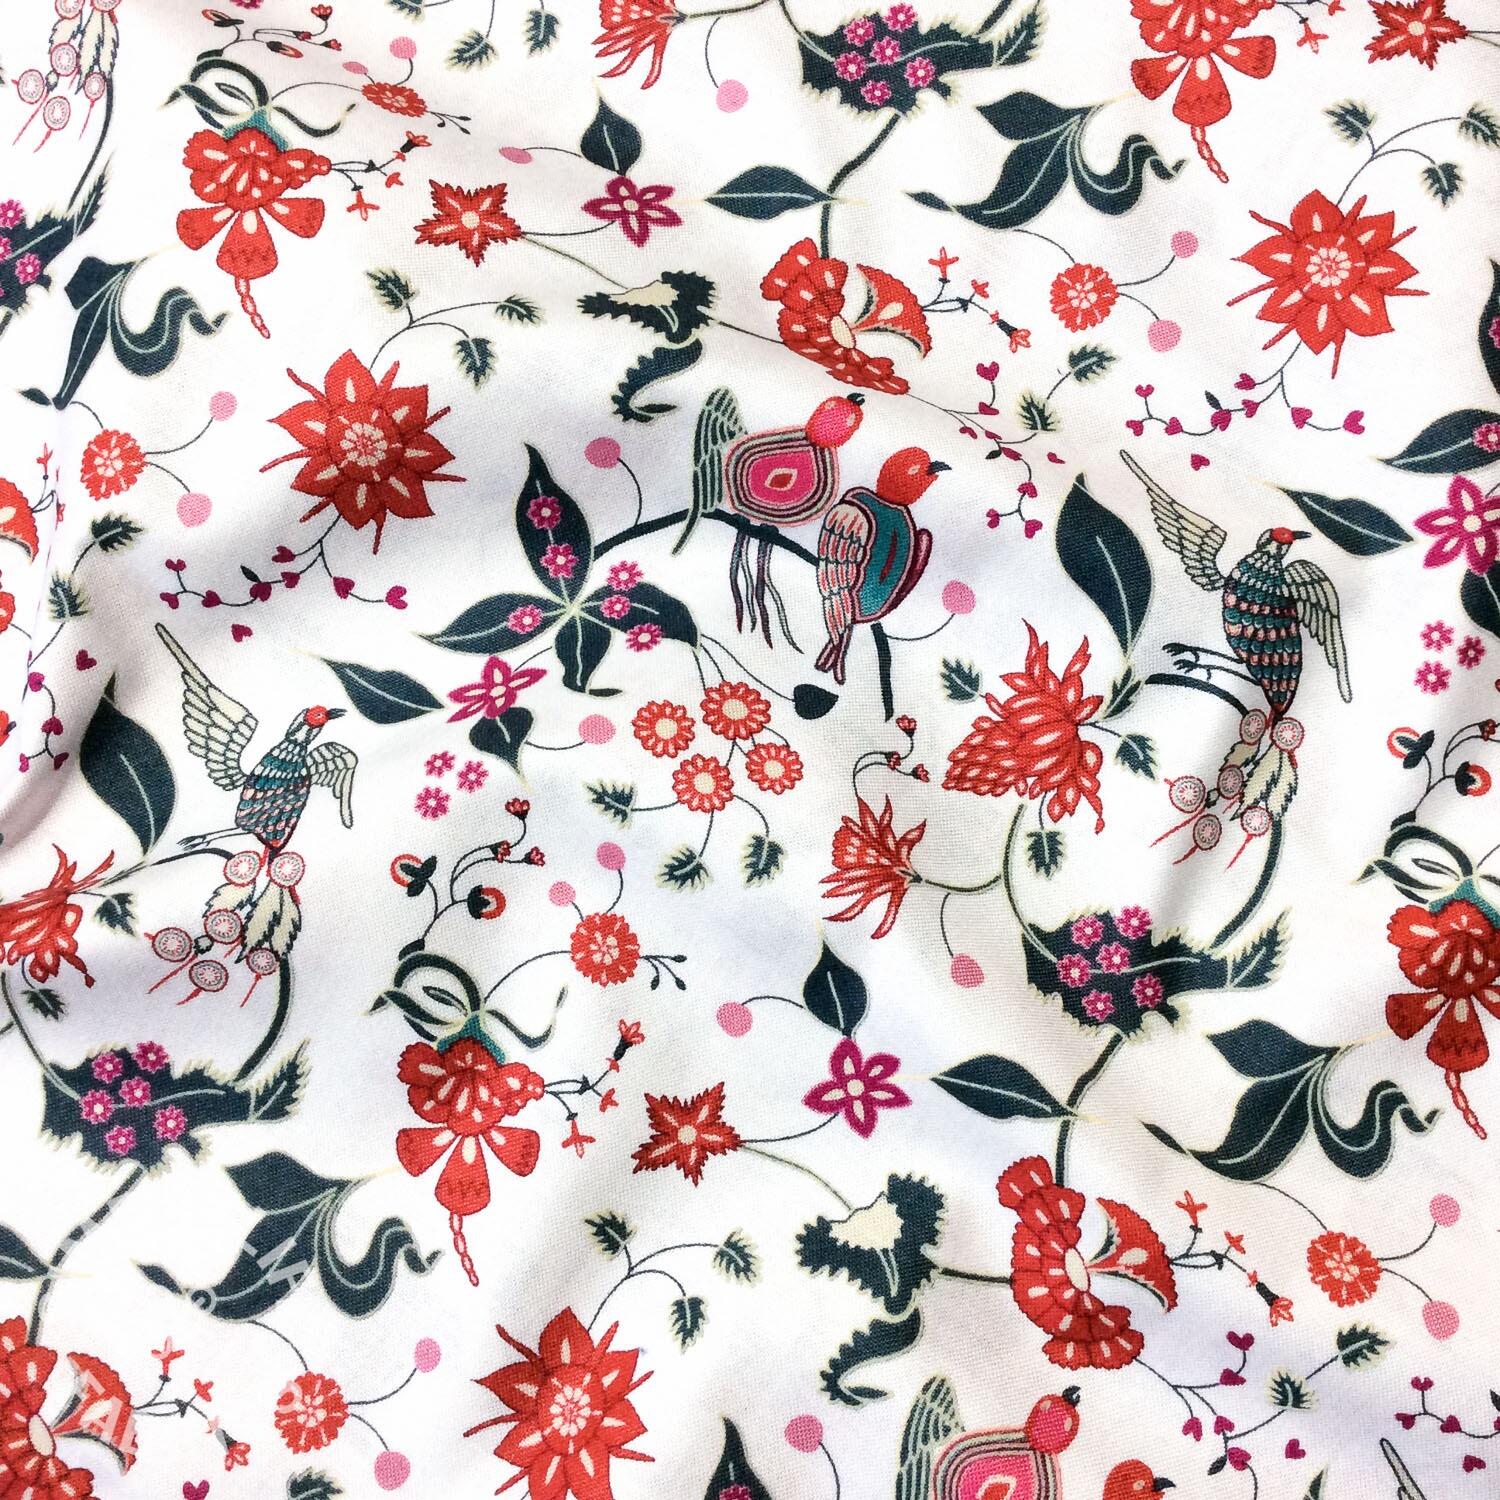 Indian Summer V&A cotton fabric